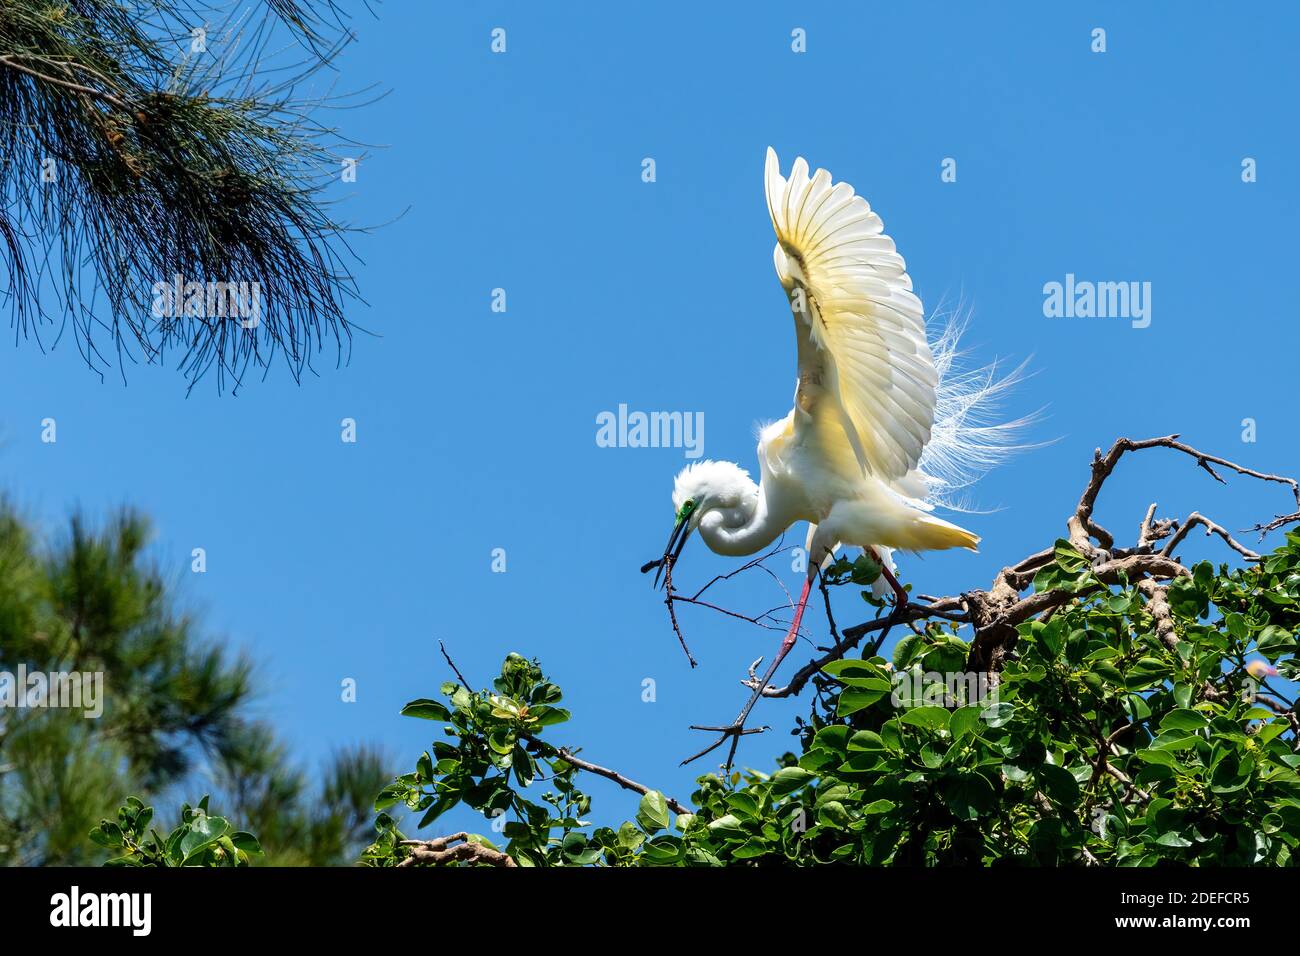 Eastern great egret (Ardea modesta) standing on foliage carrying a twig for nest building in breeding season, Queensland Australia Stock Photo